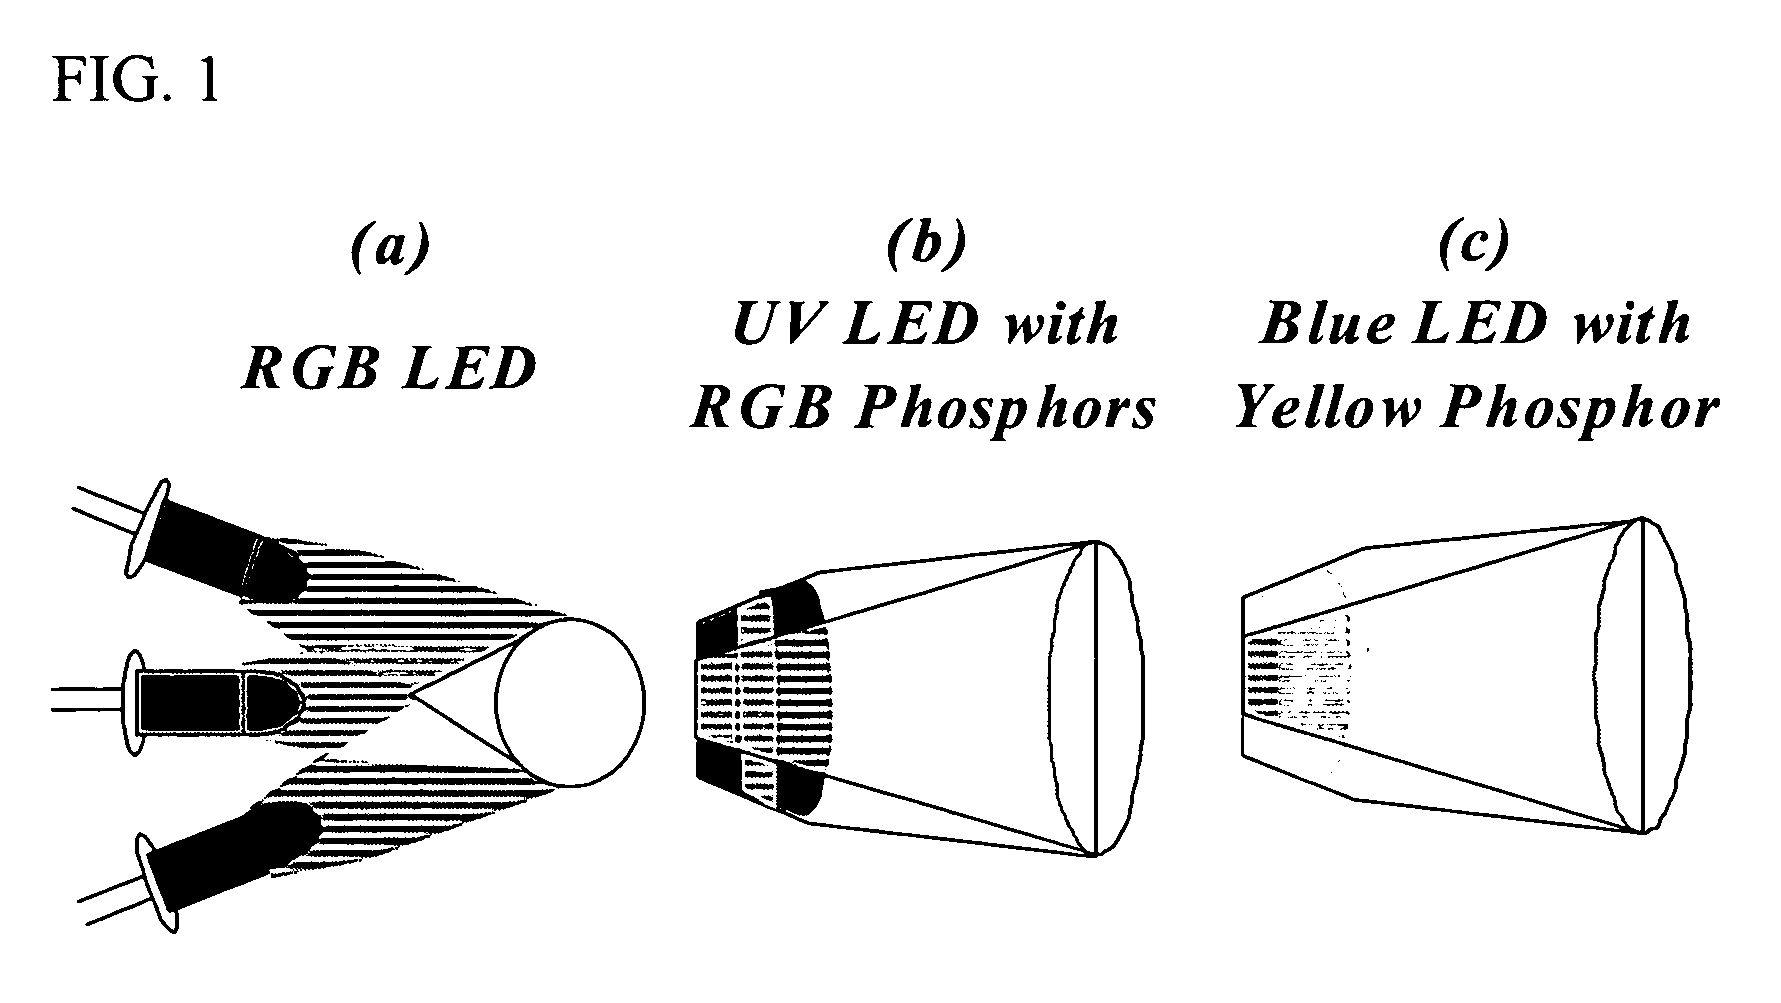 Phosphor materials and illumination devices made therefrom